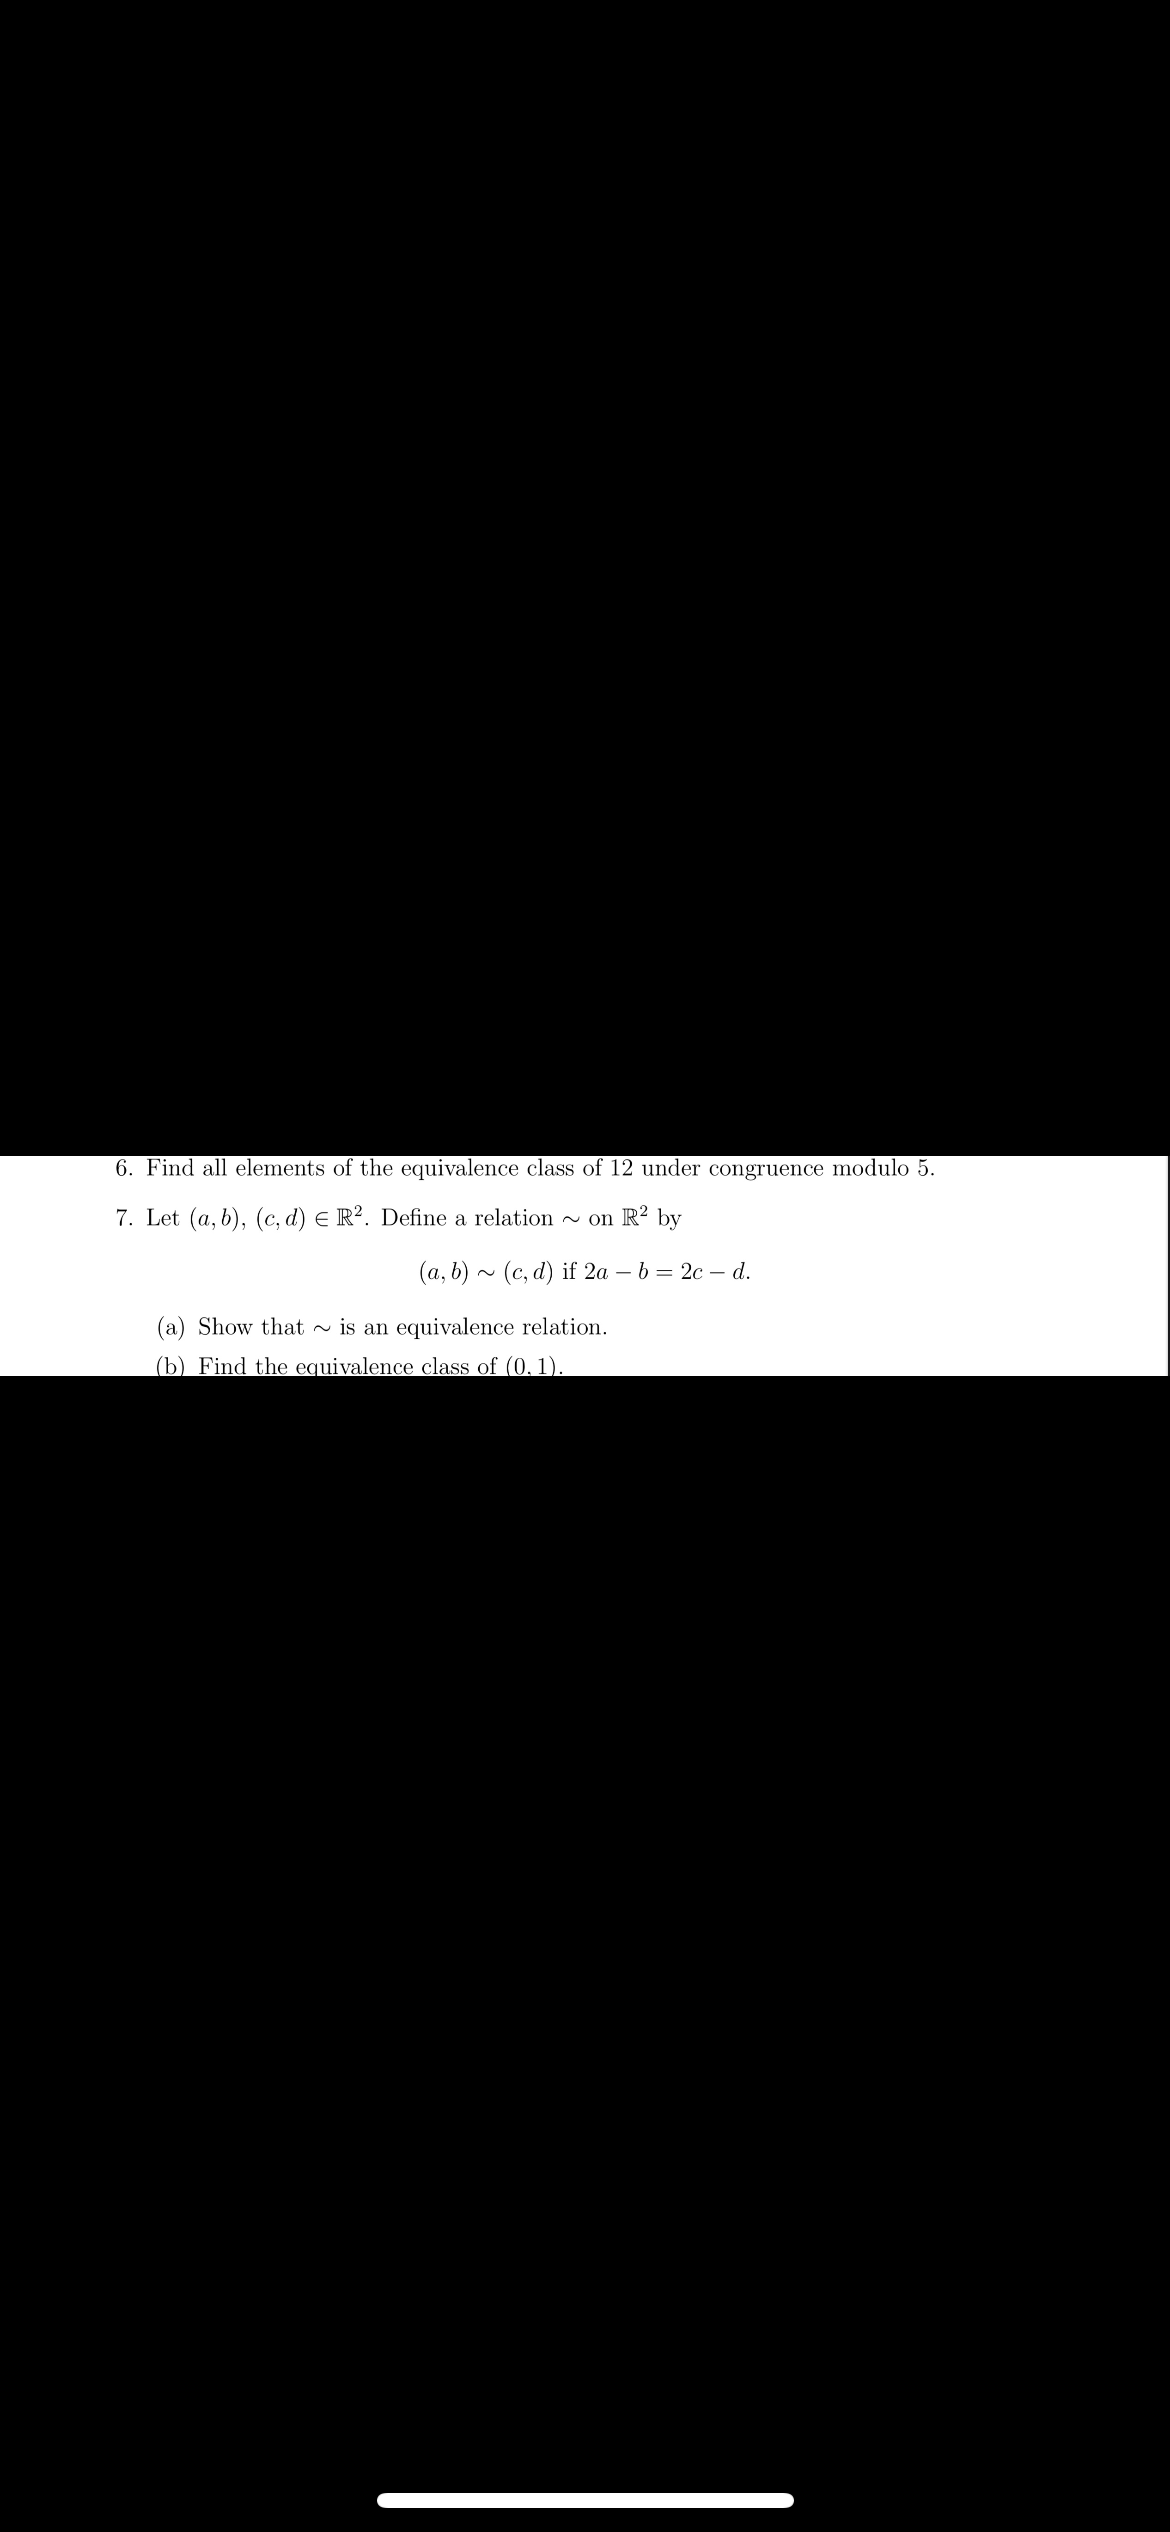 6. Find all elements of the equivalence class of 12 under congruence modulo 5.
7. Let (a, b), (c, d) E R2. Define a relation ~on R² by
(a, b)~ (c,d) if 2a - b = 2c - d.
(a) Show that is an equivalence relation.
(b) Find the equivalence class of (0.1).